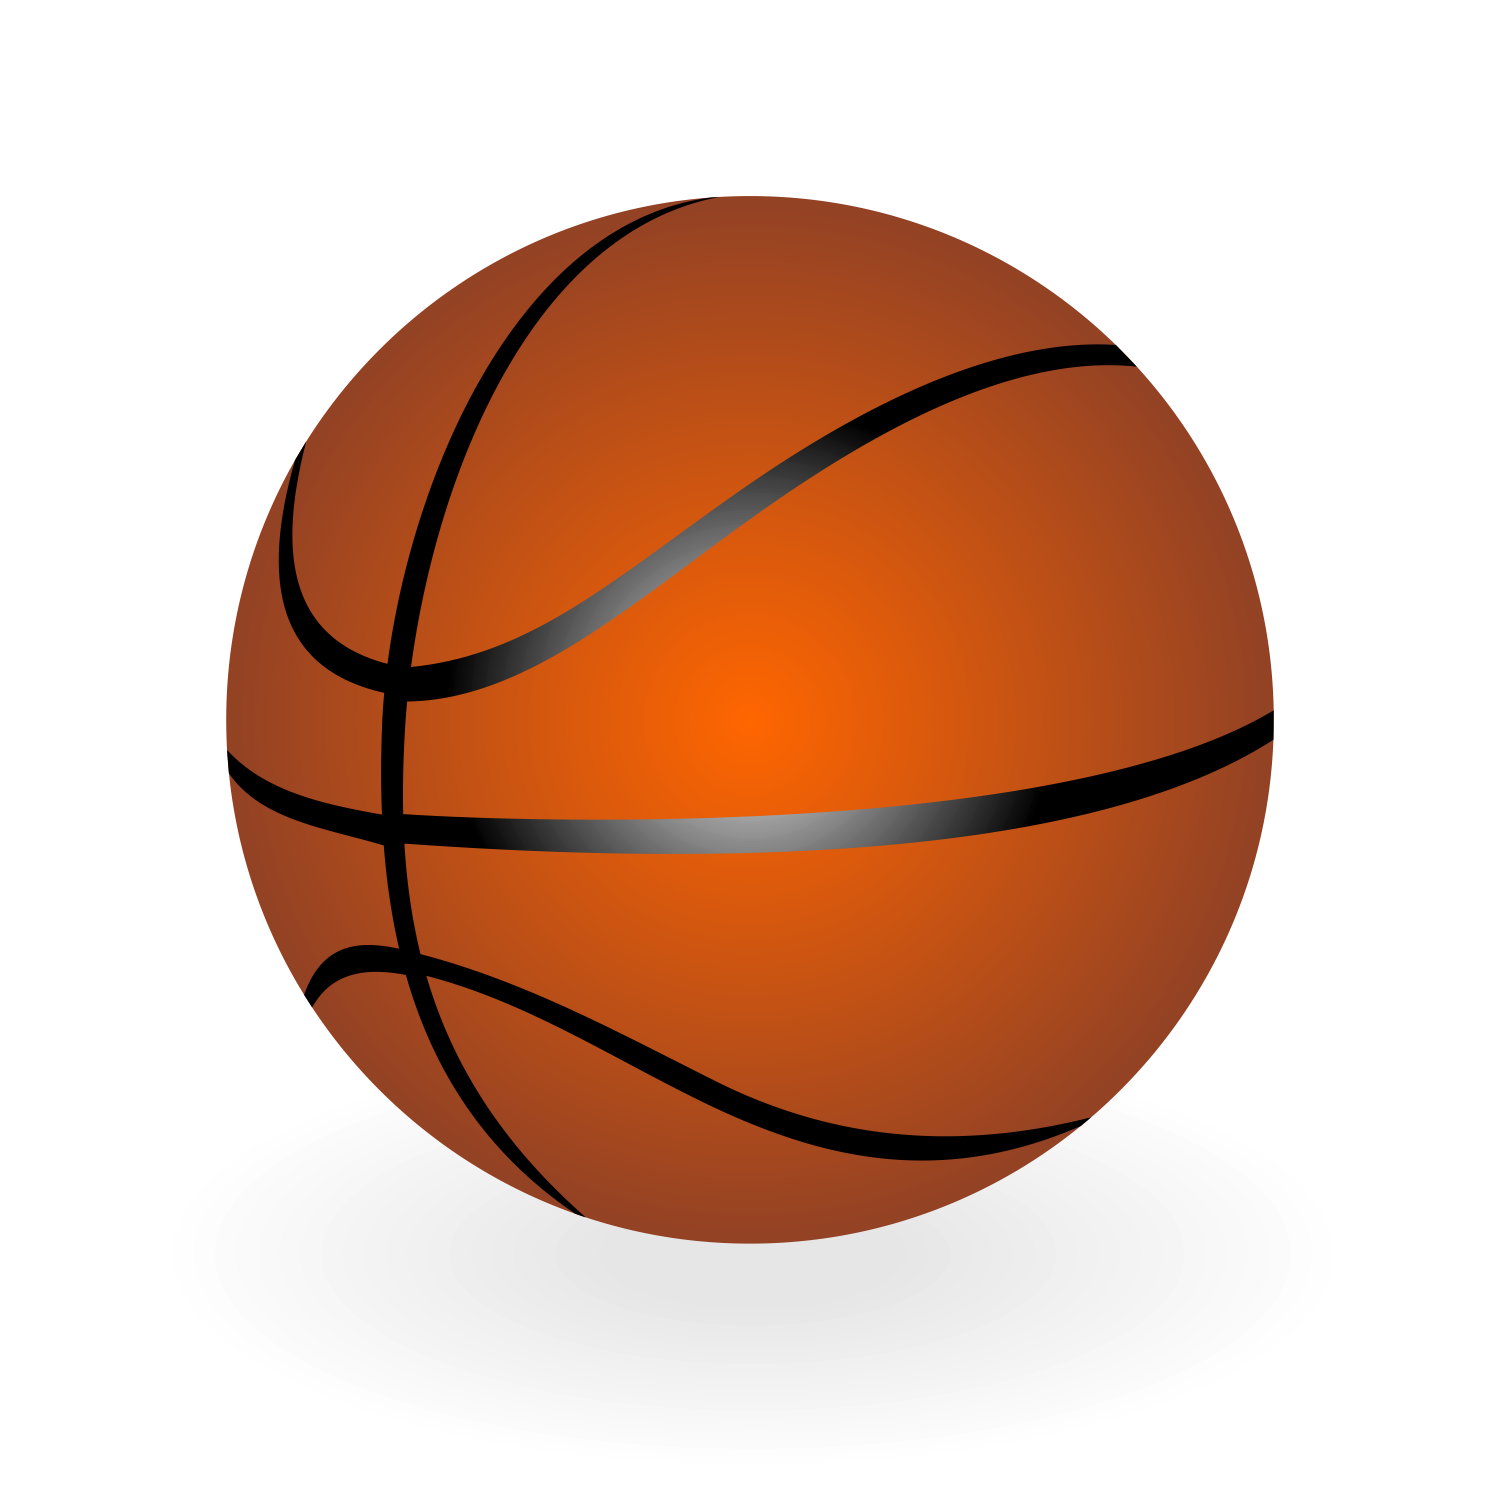 Free Vector Basketball, Download Free Clip Art, Free Clip.